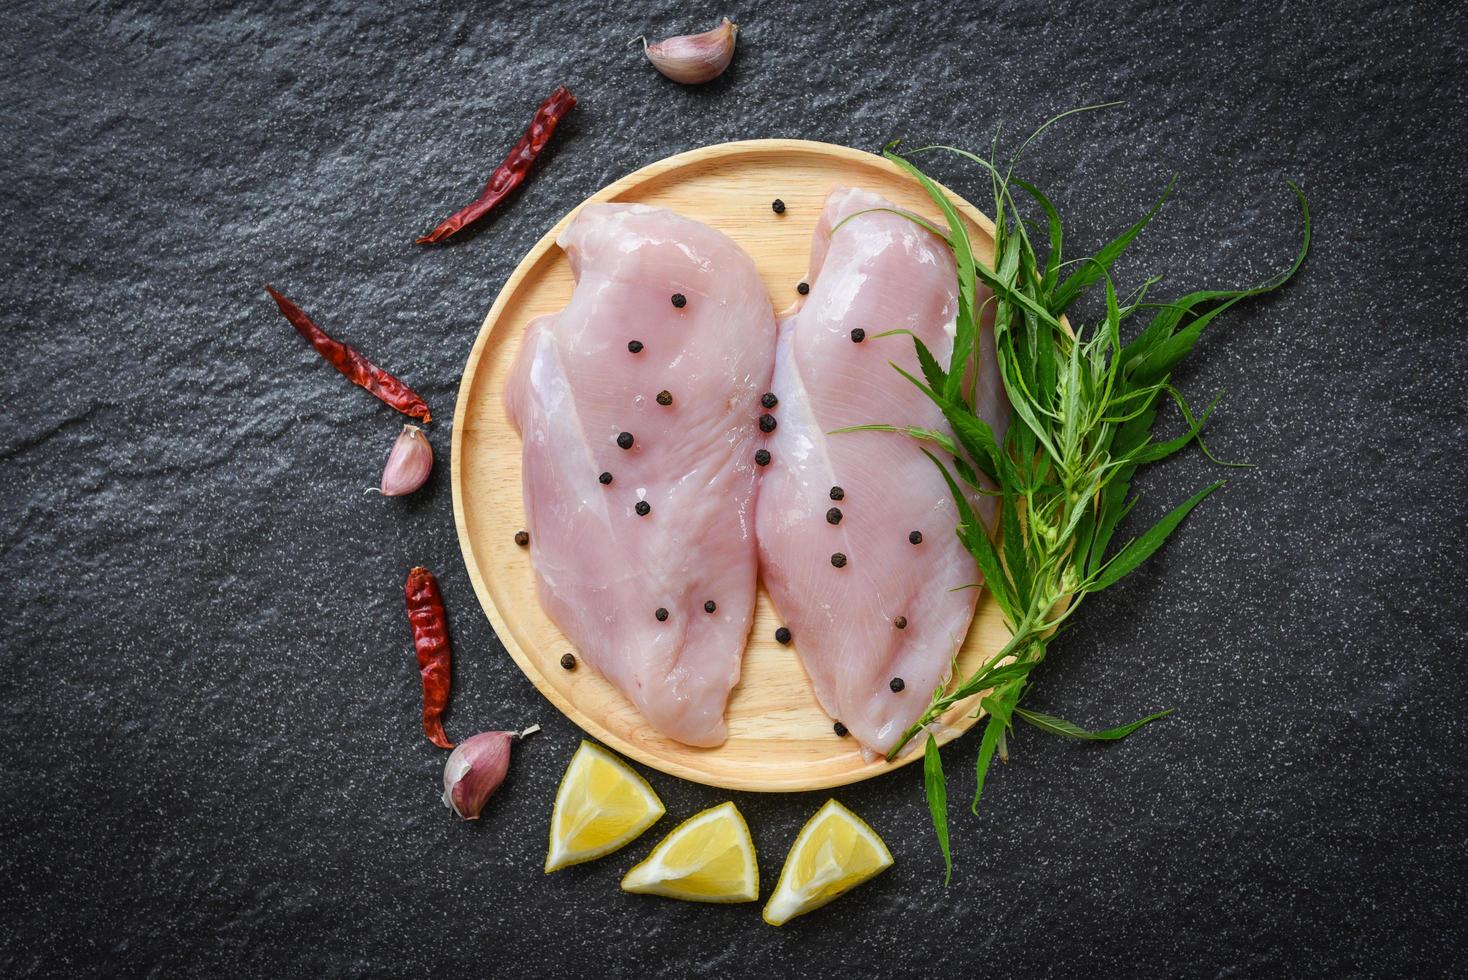 raw chicken breast with marijuana leaf cannabis herbs and spices on wooden plate - fresh uncooked chicken meat marinated with ingredients for cooking photo